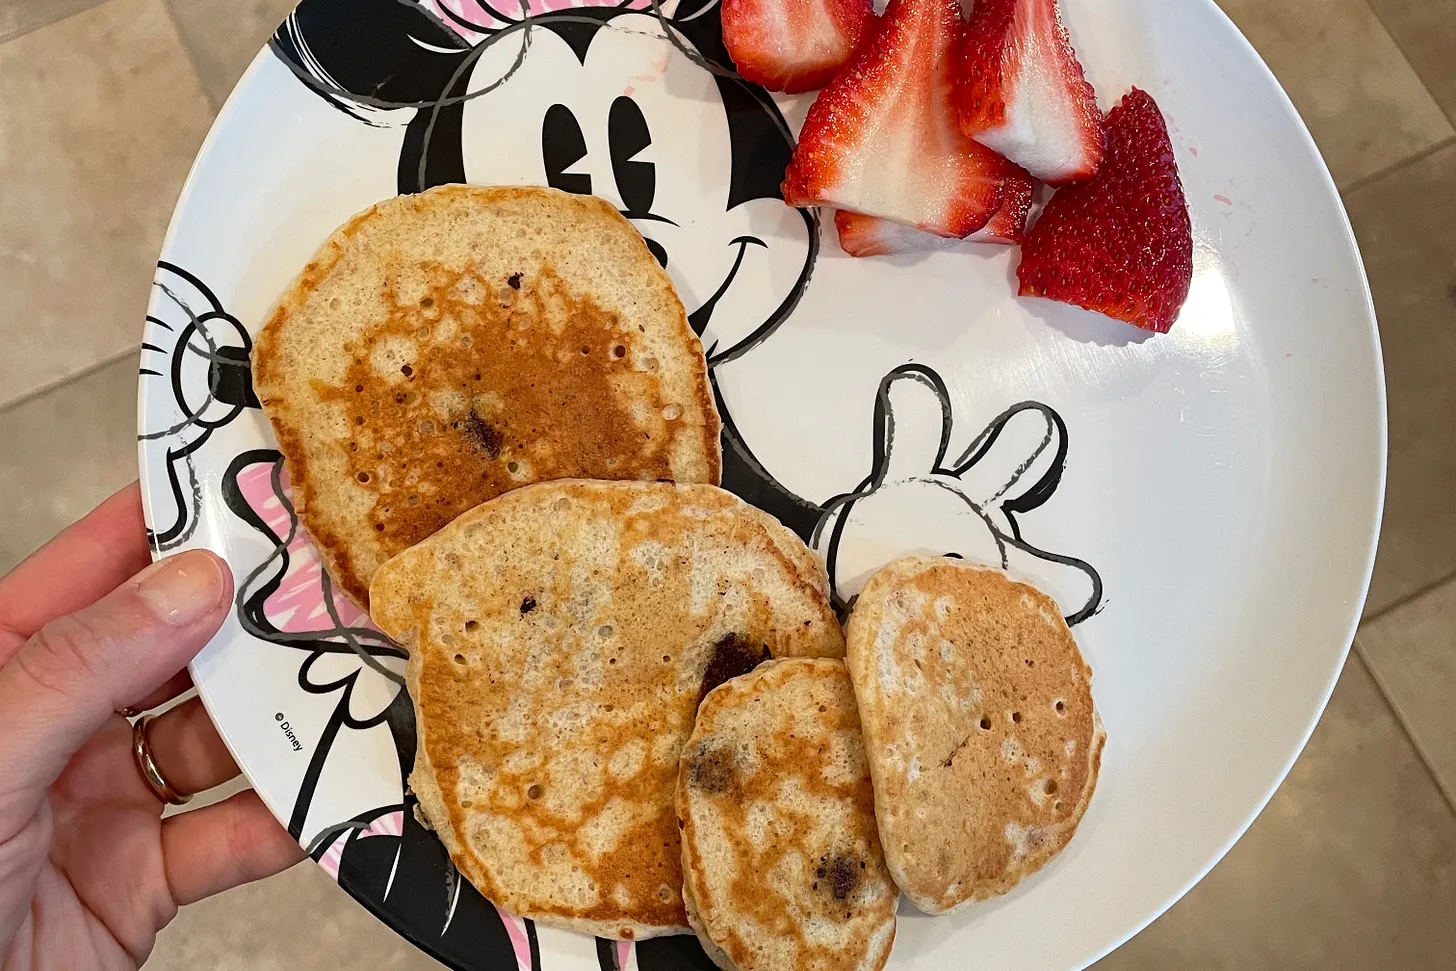 Pancakes and strawberries on Mickey plate.